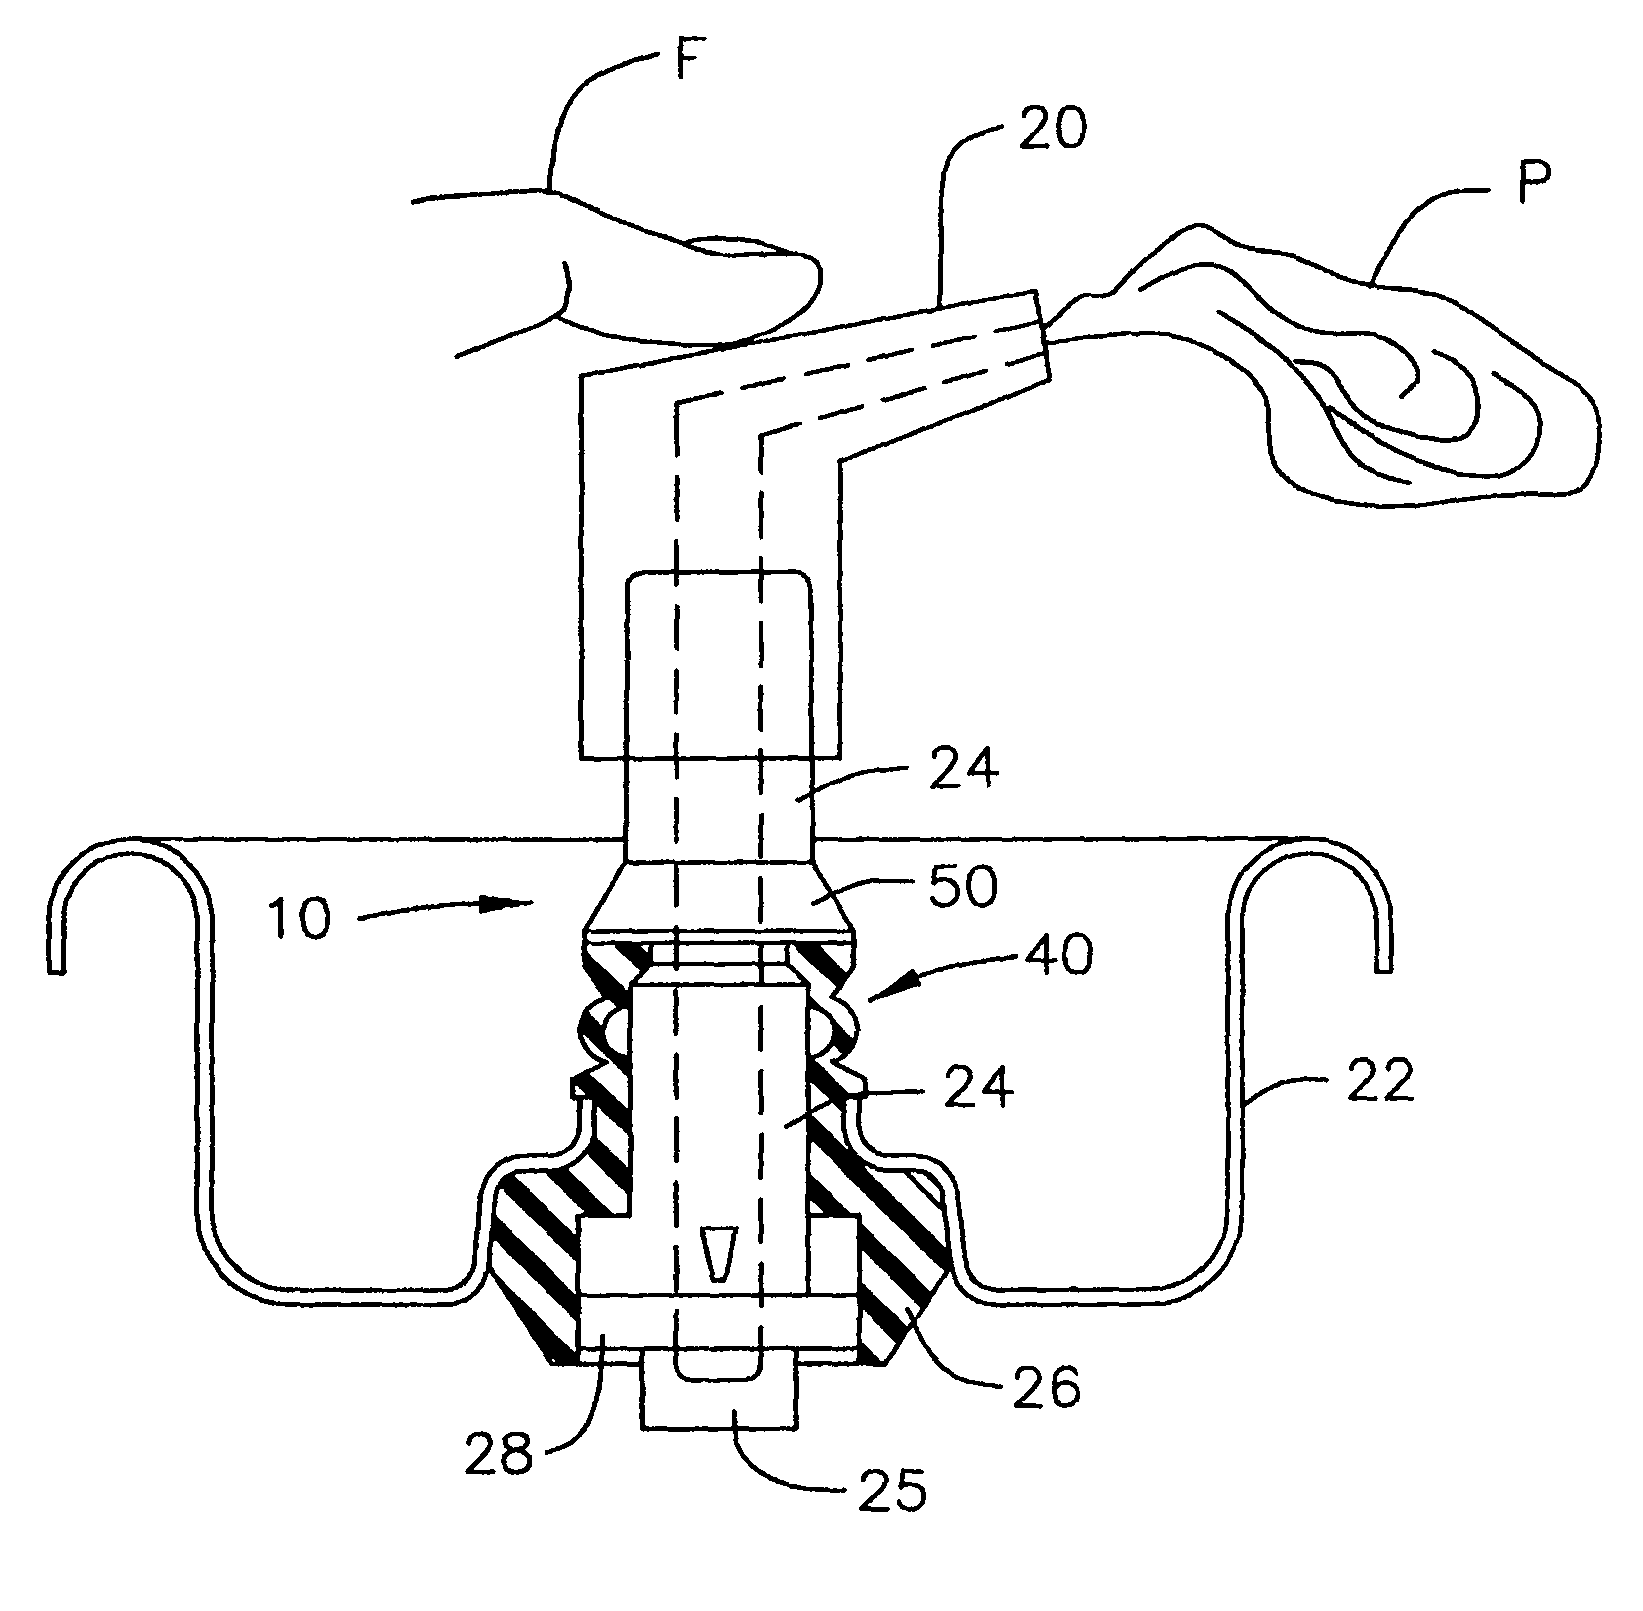 Valve for use in a container which employs pressure to dispense product